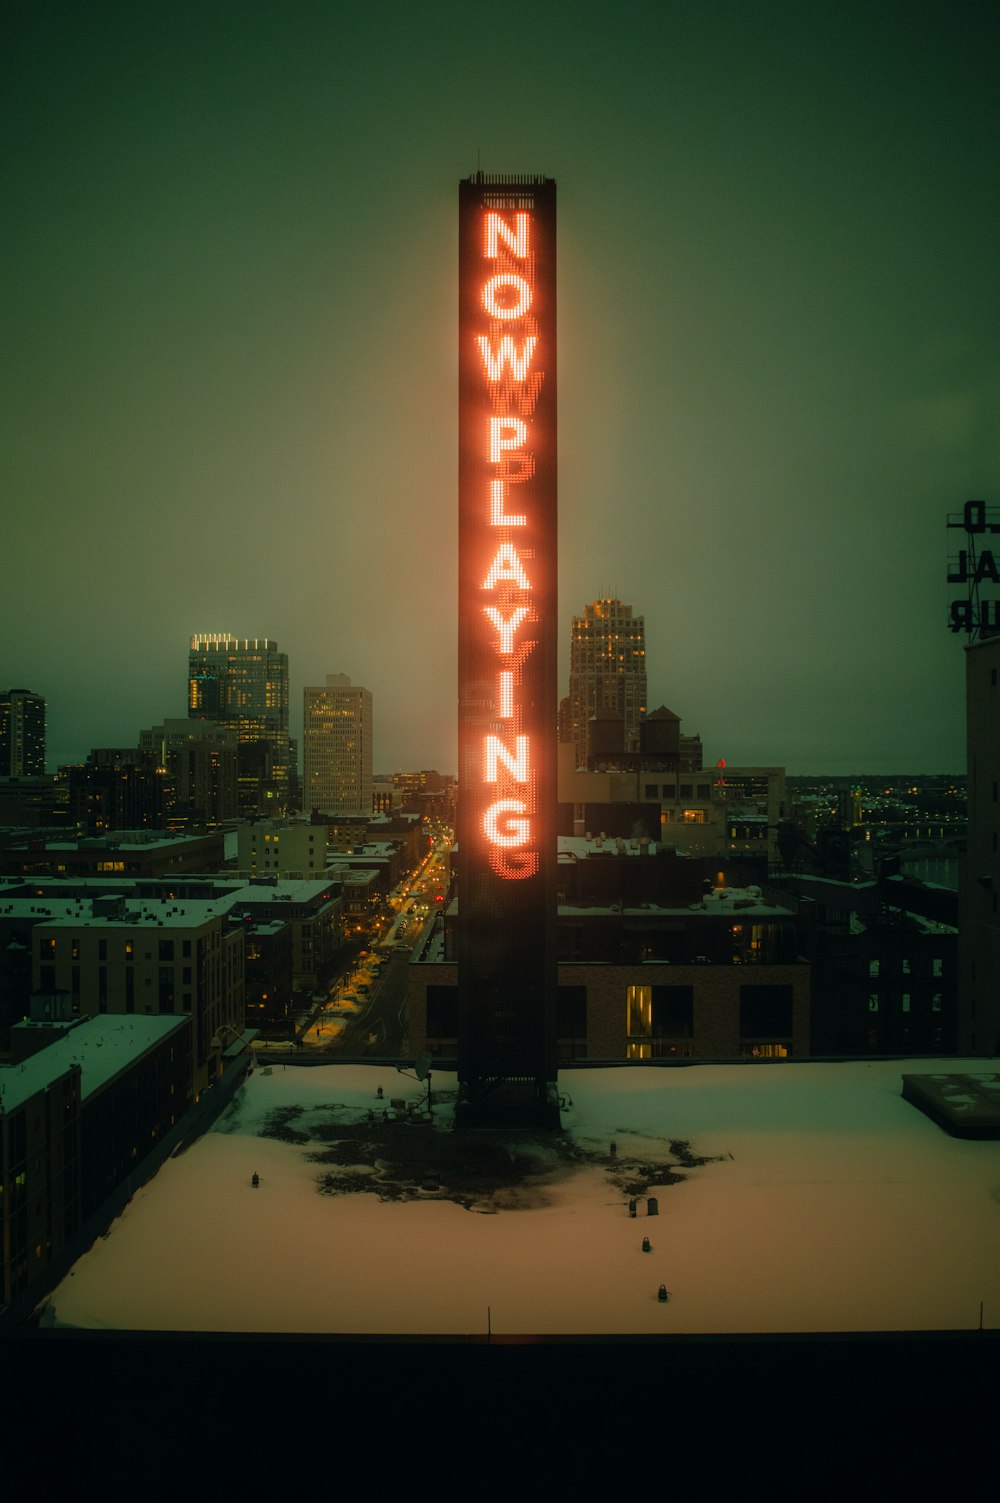 a neon sign that says no playing in the snow